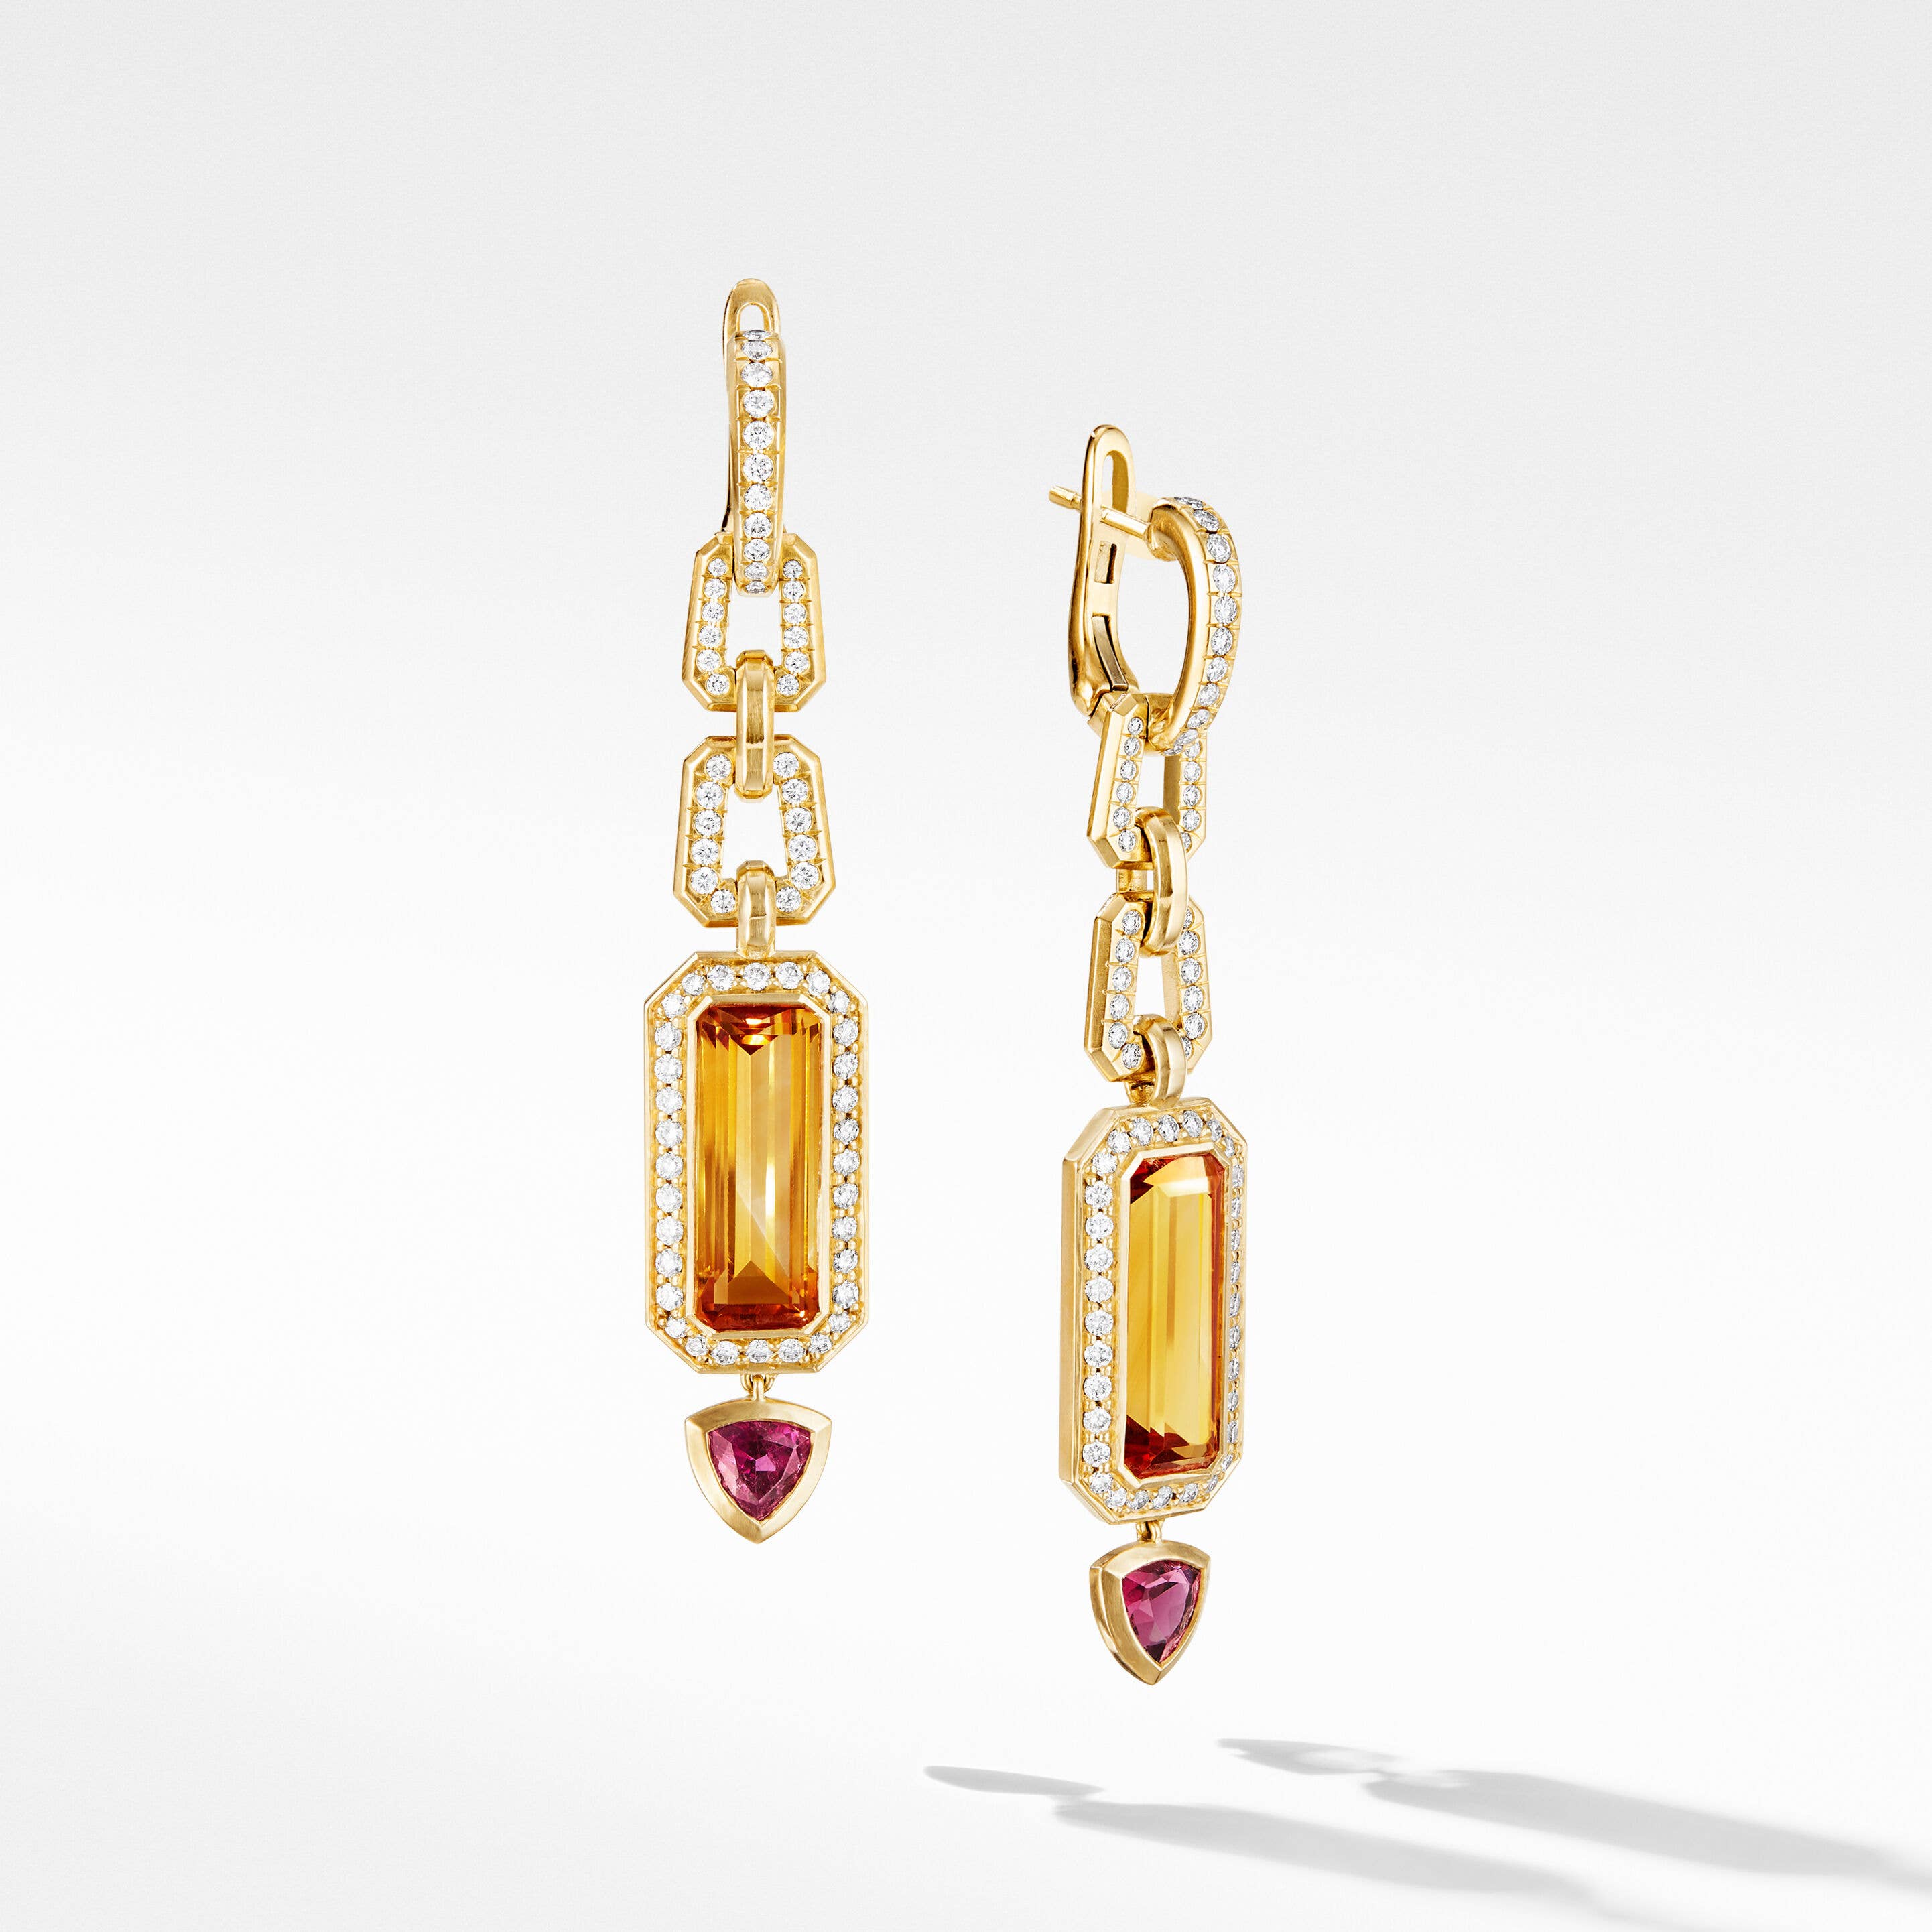 Novella Mosaic Drop Earrings in 18K Yellow Gold with Madeira Citrine, Rubellite and Pavé Diamonds